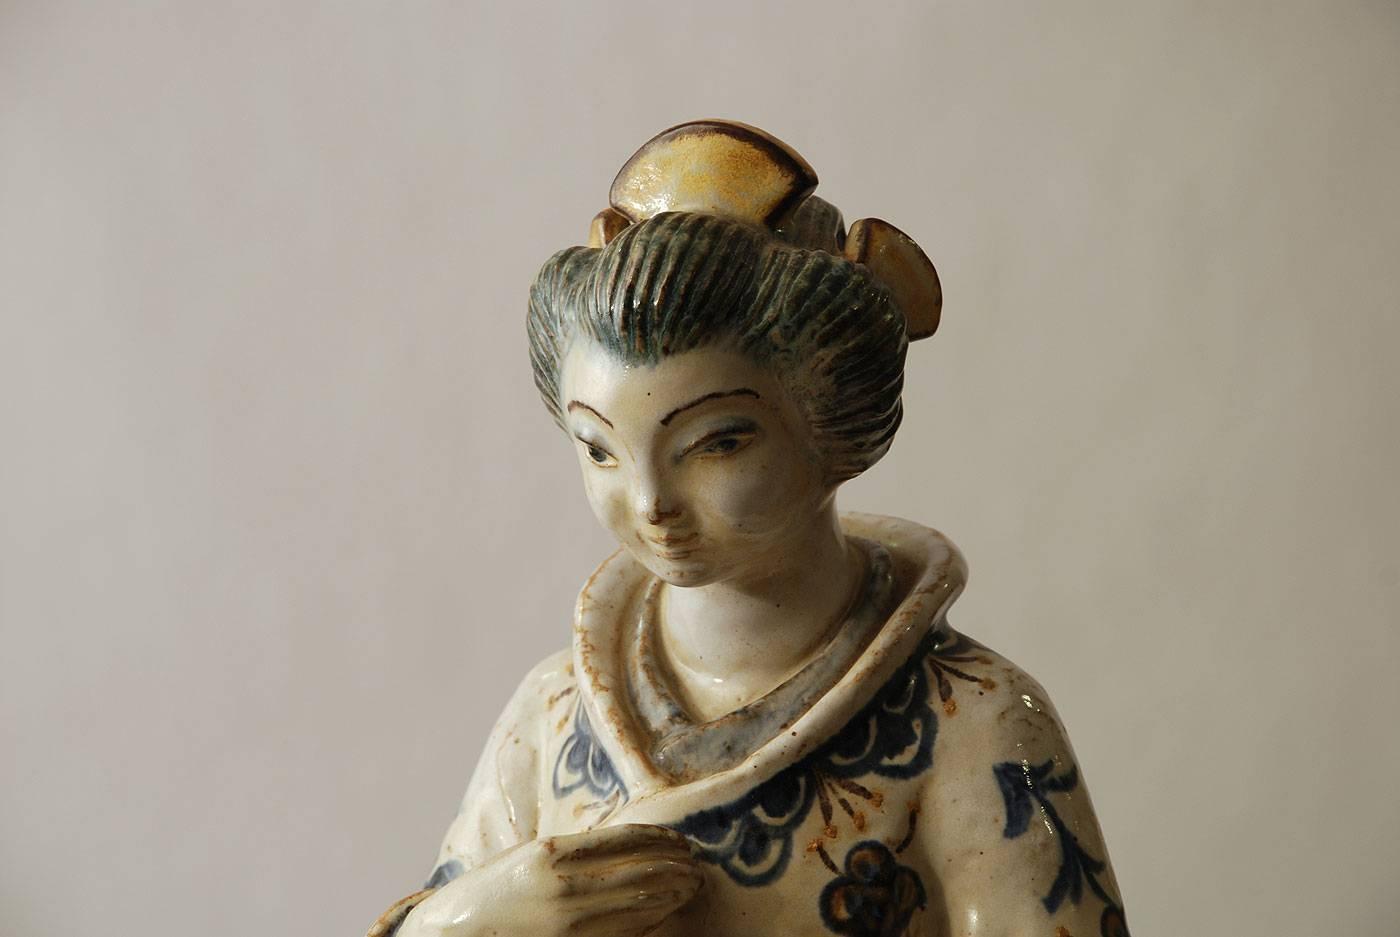 L. Hjorths terracotta fabric

Unique stoneware sculpture of a Japanese woman with semi-gloss glaze in cream, blue and brown.
Impressed "L Hjorth", Stag.
Measures: Width 10" (26cm) 
height 21" (53 cm)
Excellent condition, no